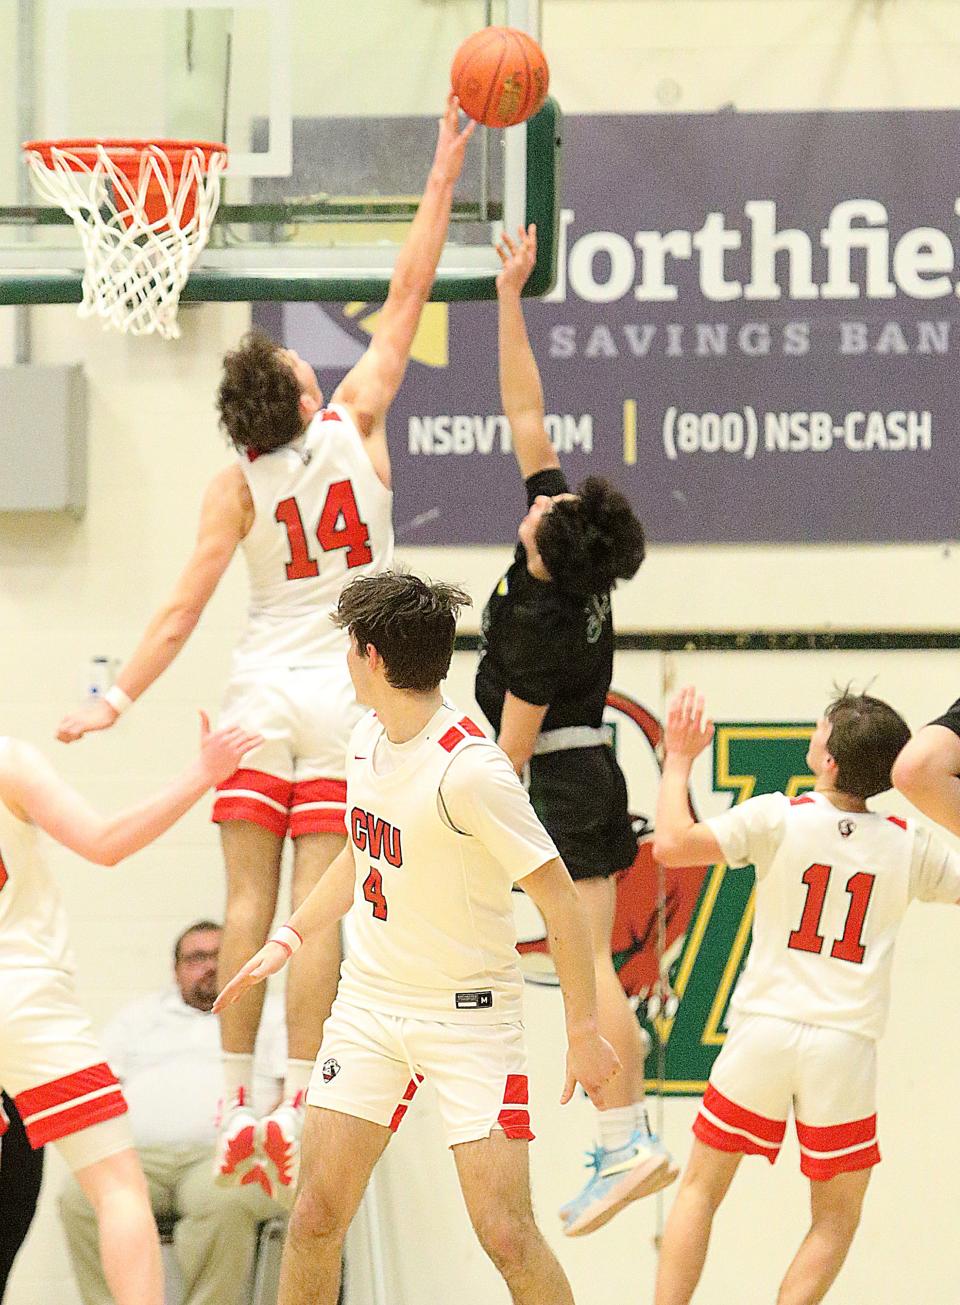 CVU's Tucker Tharpe blocks the shot of Rice's Dallas St.Peter during the Redhawks 42-38 win over the Green Knights in the D1 championship game at Patrick gym on Saturday night.